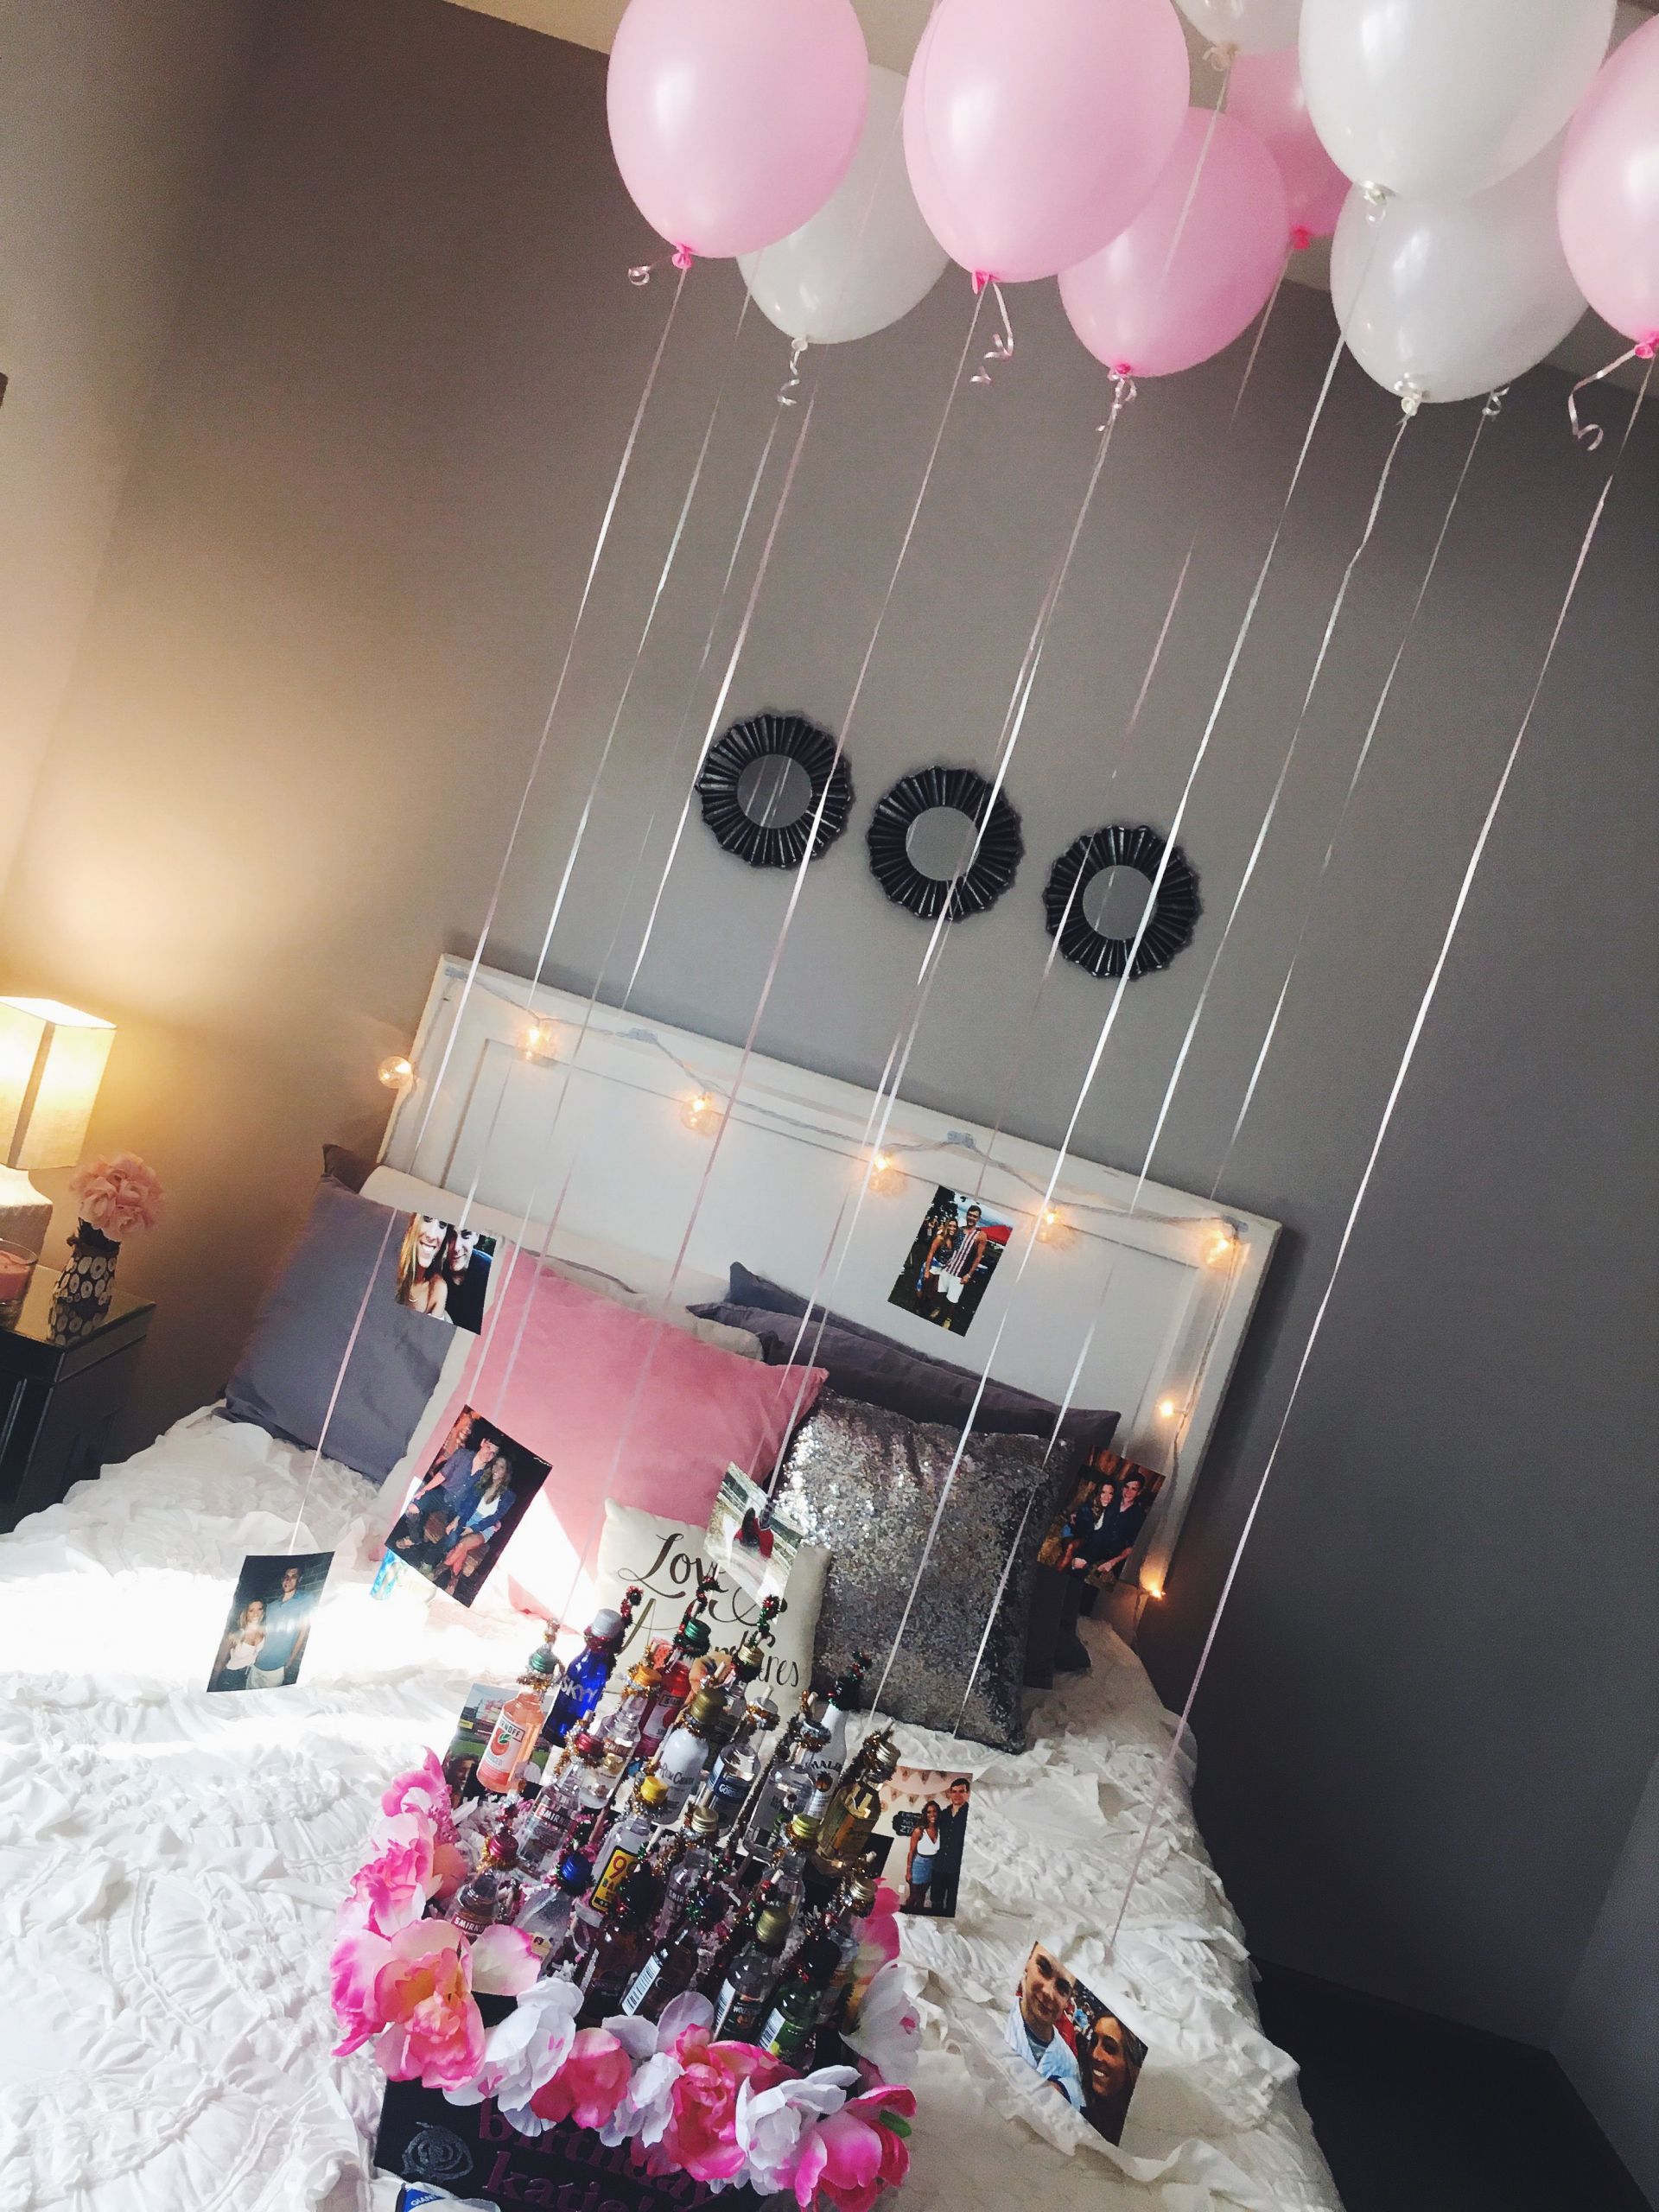 Creative Birthday Gift Ideas For Girlfriend
 easy and cute decorations for a friend or girlfriends 21st